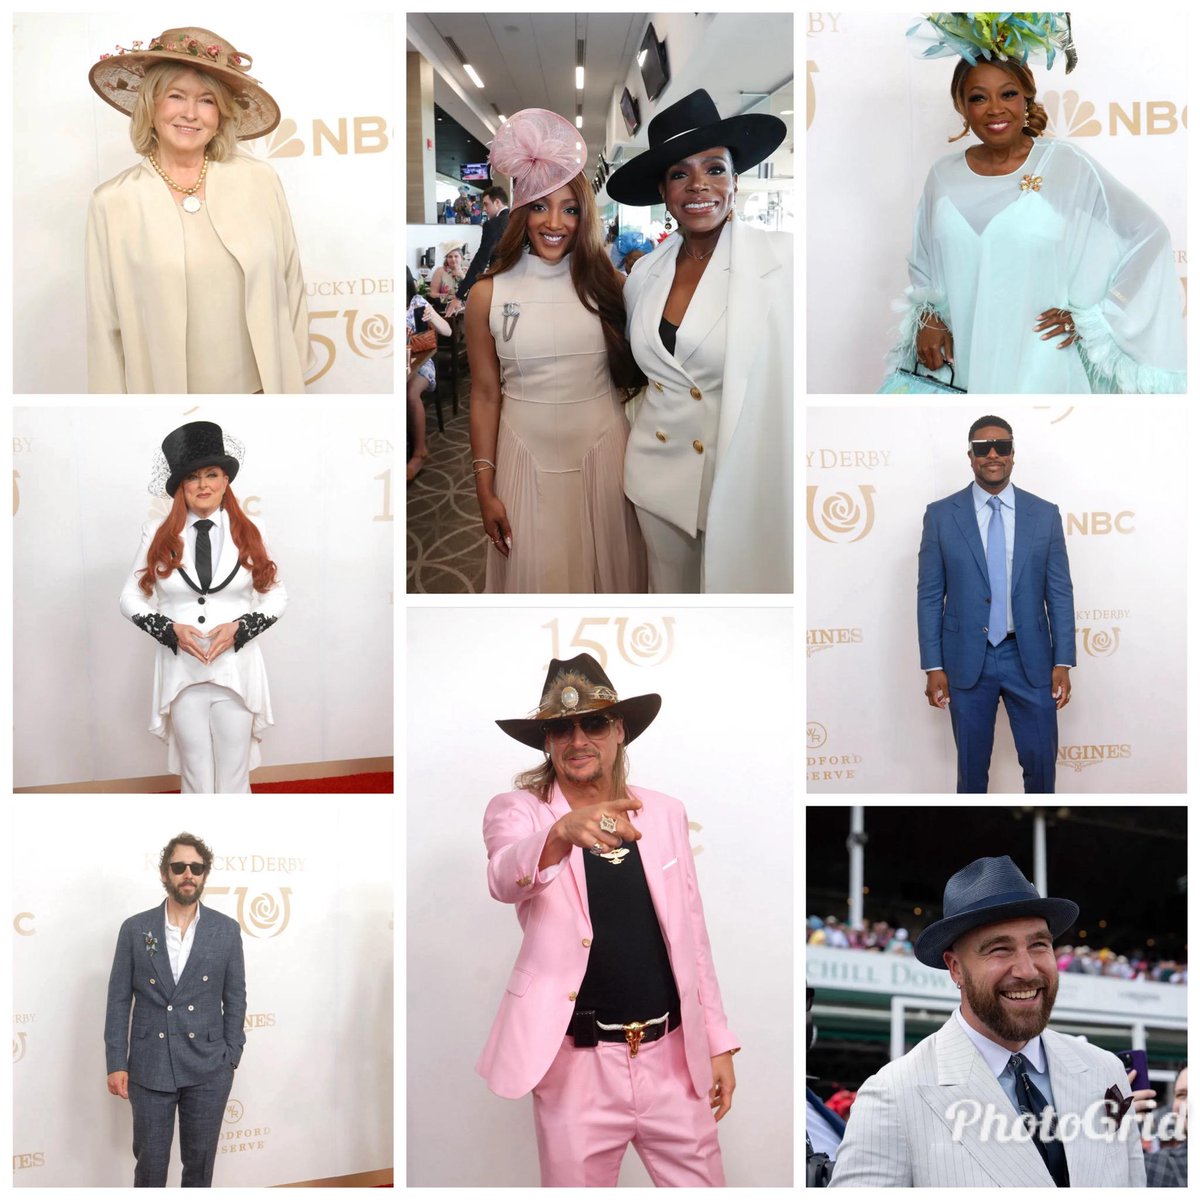 Enjoyed watching the 150th Kentucky Derby! My horse, Sierra Leone, came in 2nd 😢 A lot of celebrities were there. Thank goodness no one had to endure #Harry and #MeghanMarkle presence! #KentuckyDerby150 #SierraLeone #KentuckyDerby